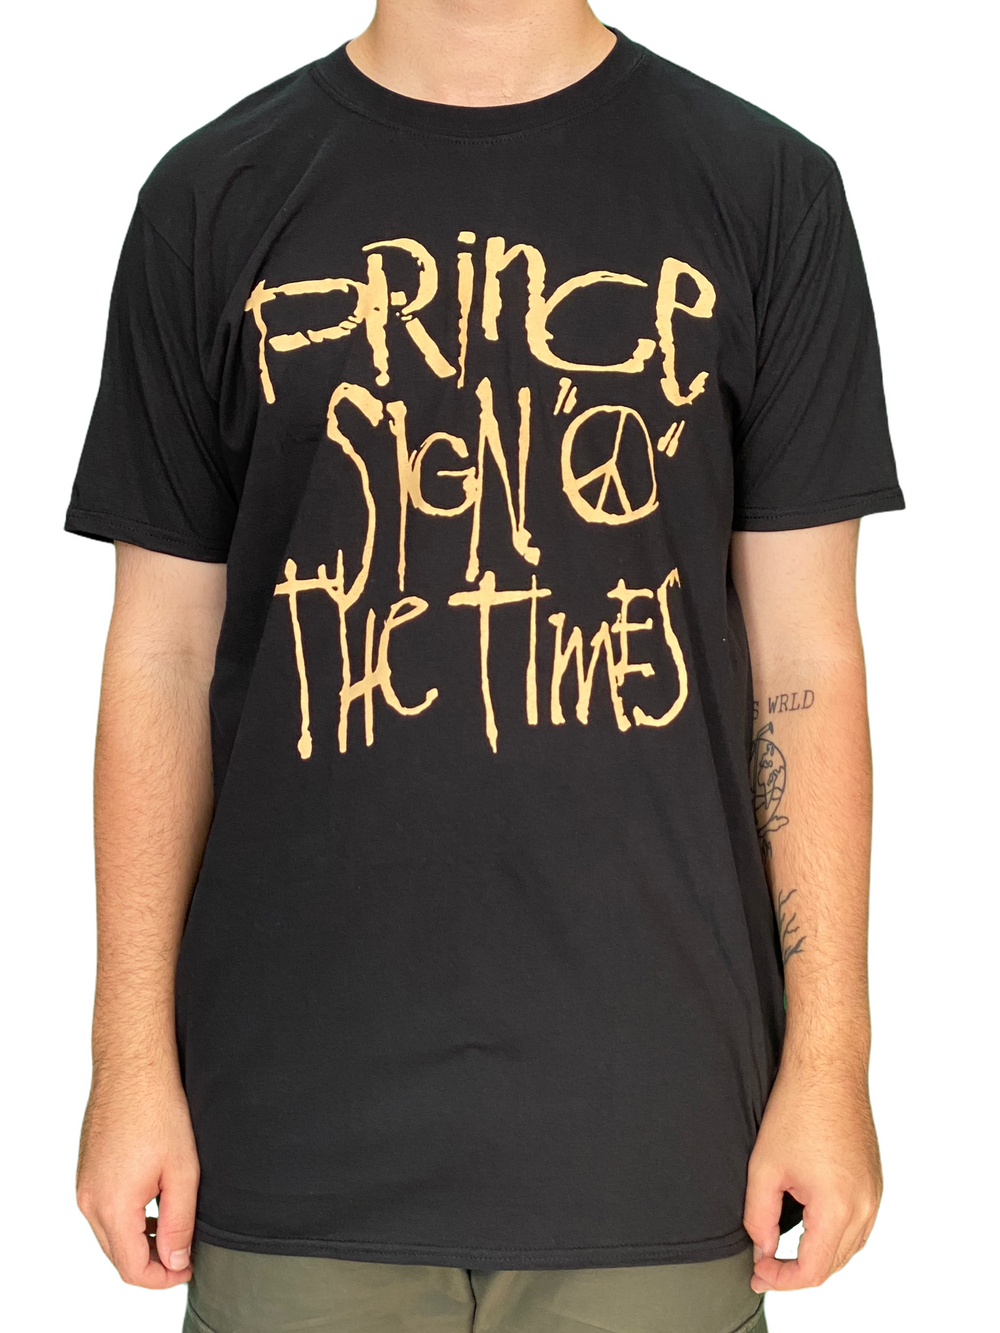 Prince – SIGN 'O' THE TIMES  Xclusive Official Unisex T-SHIRT Limited Edition FRONT ONLY